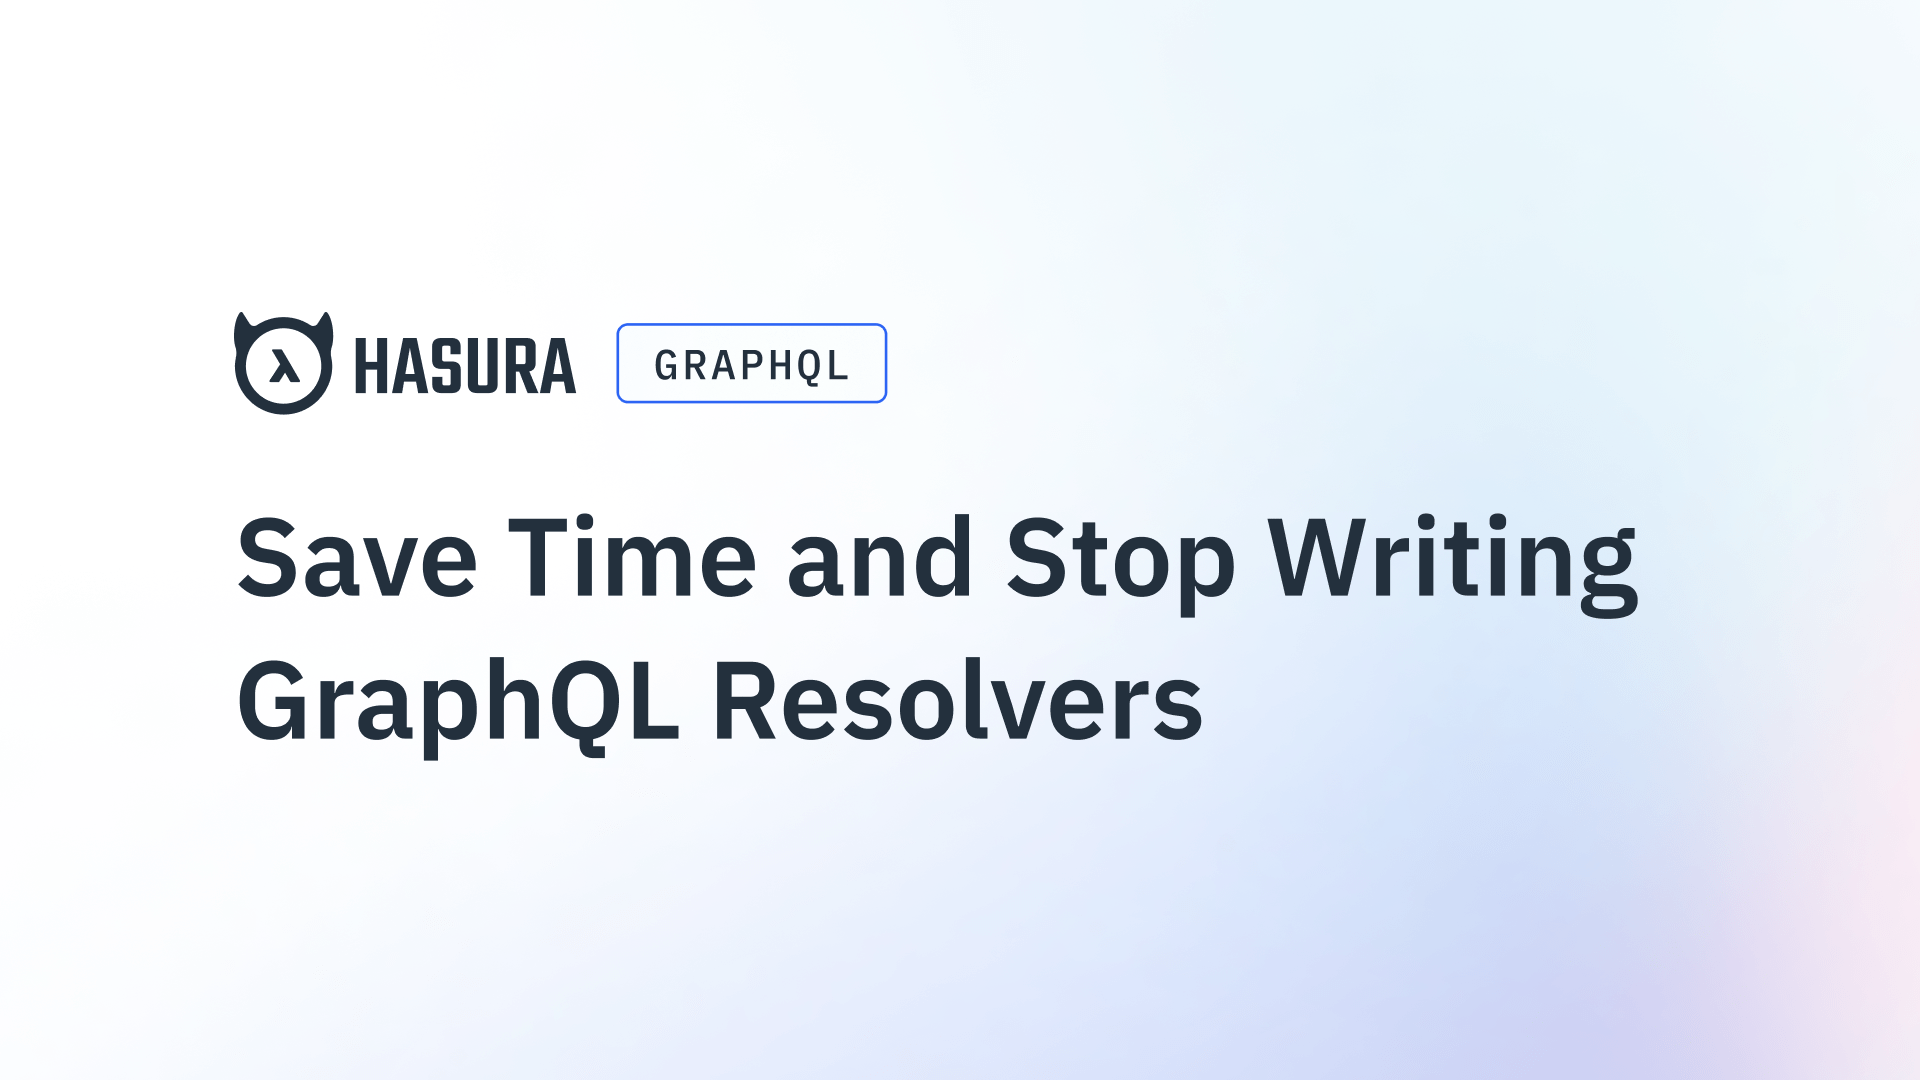 Save Time and Stop Writing GraphQL Resolvers